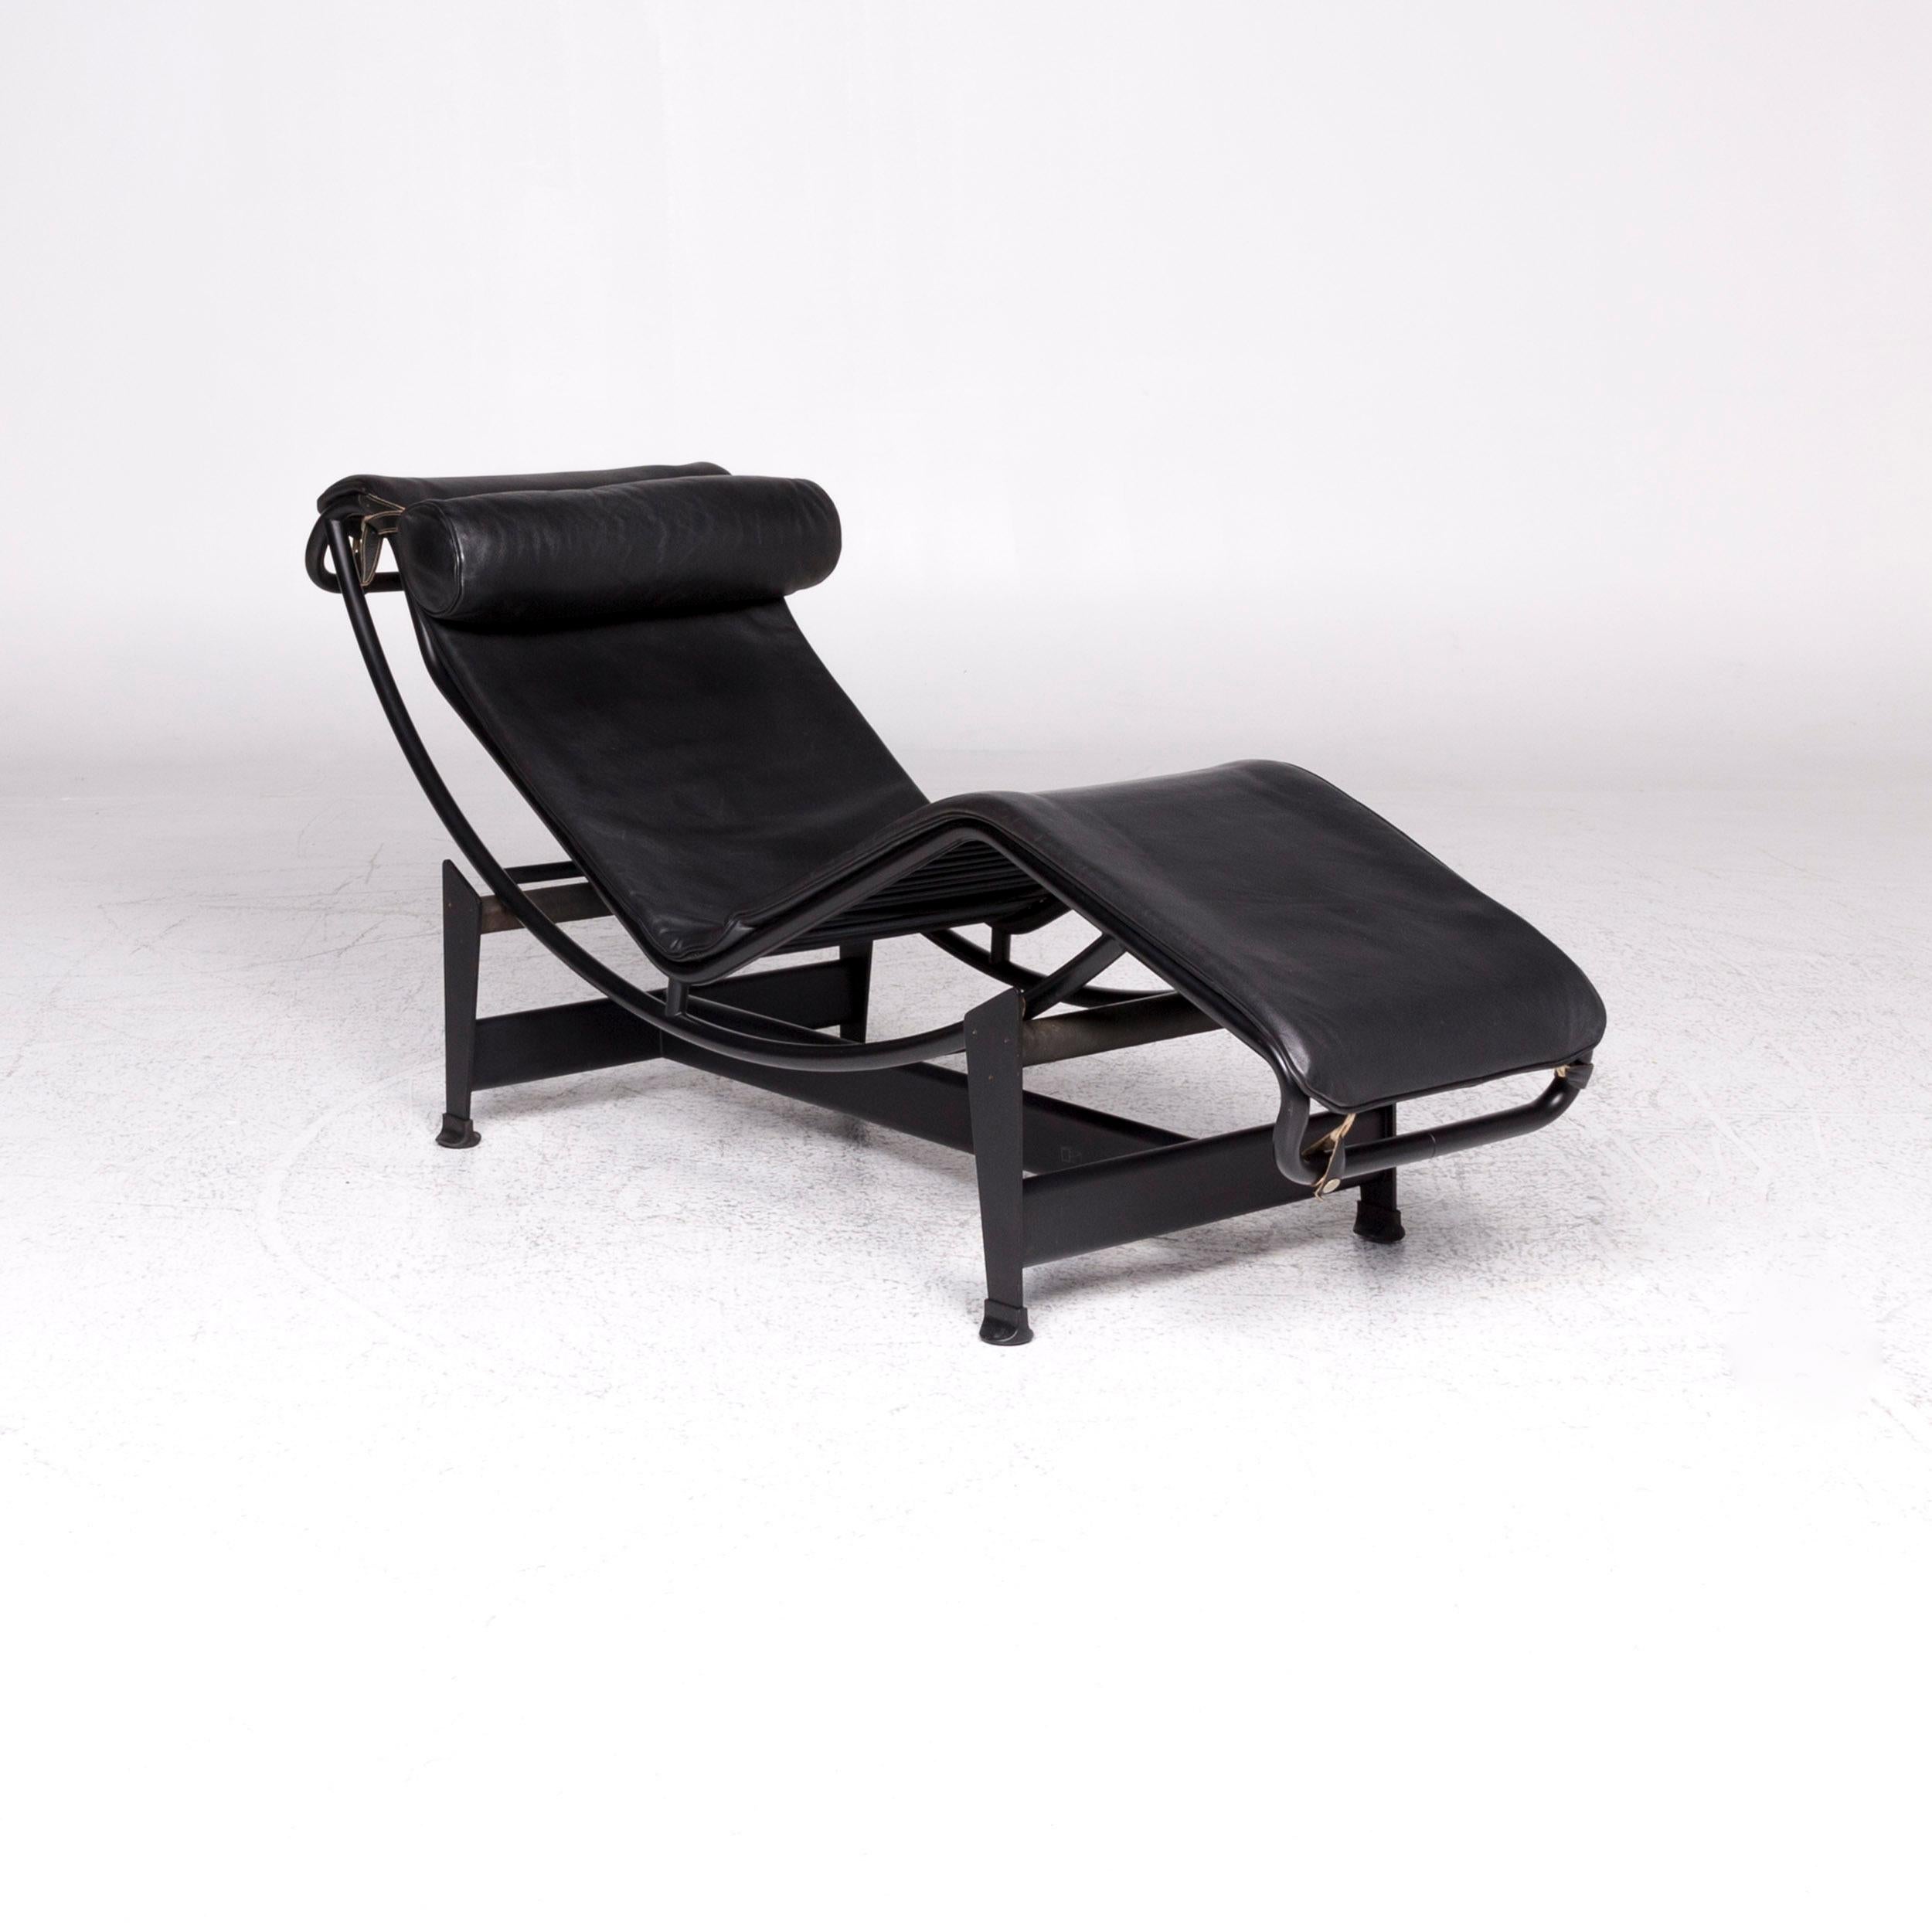 Italian Cassina Le Corbusier LC 4 Leather Lounger Black Relax Function